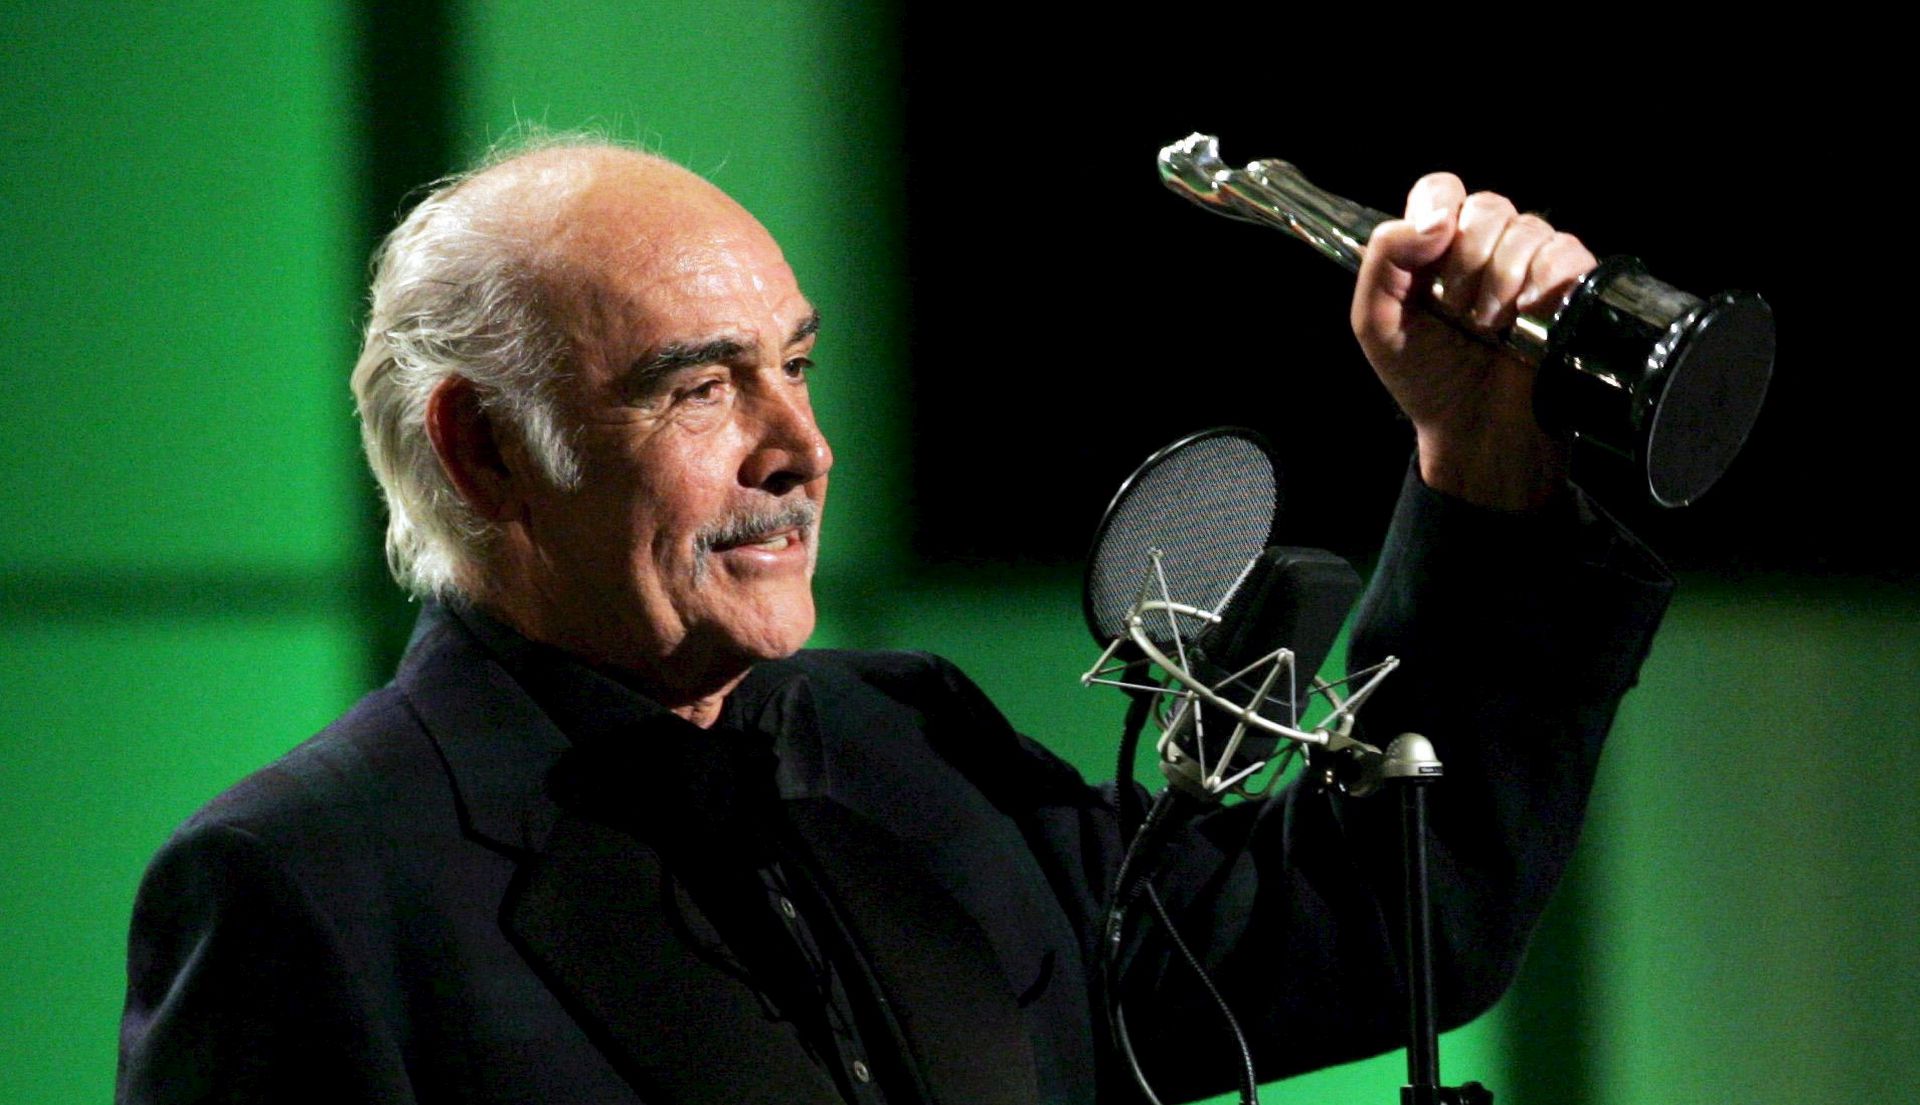 epa08788208 (FILE) - A file picture dated 03 December 2005 shows Scottish actor Sir Sean Connery holding up his European Film Academy's Lifetime Achievement Award during the European Film Awards ceremony in Berlin, Germany (reissued 31 October 2020). According to media reports on 31 October 2020, Sean Connery has died aged 90.  EPA/MARCUS BRANDT GERMANY OUT *** Local Caption *** 02271734